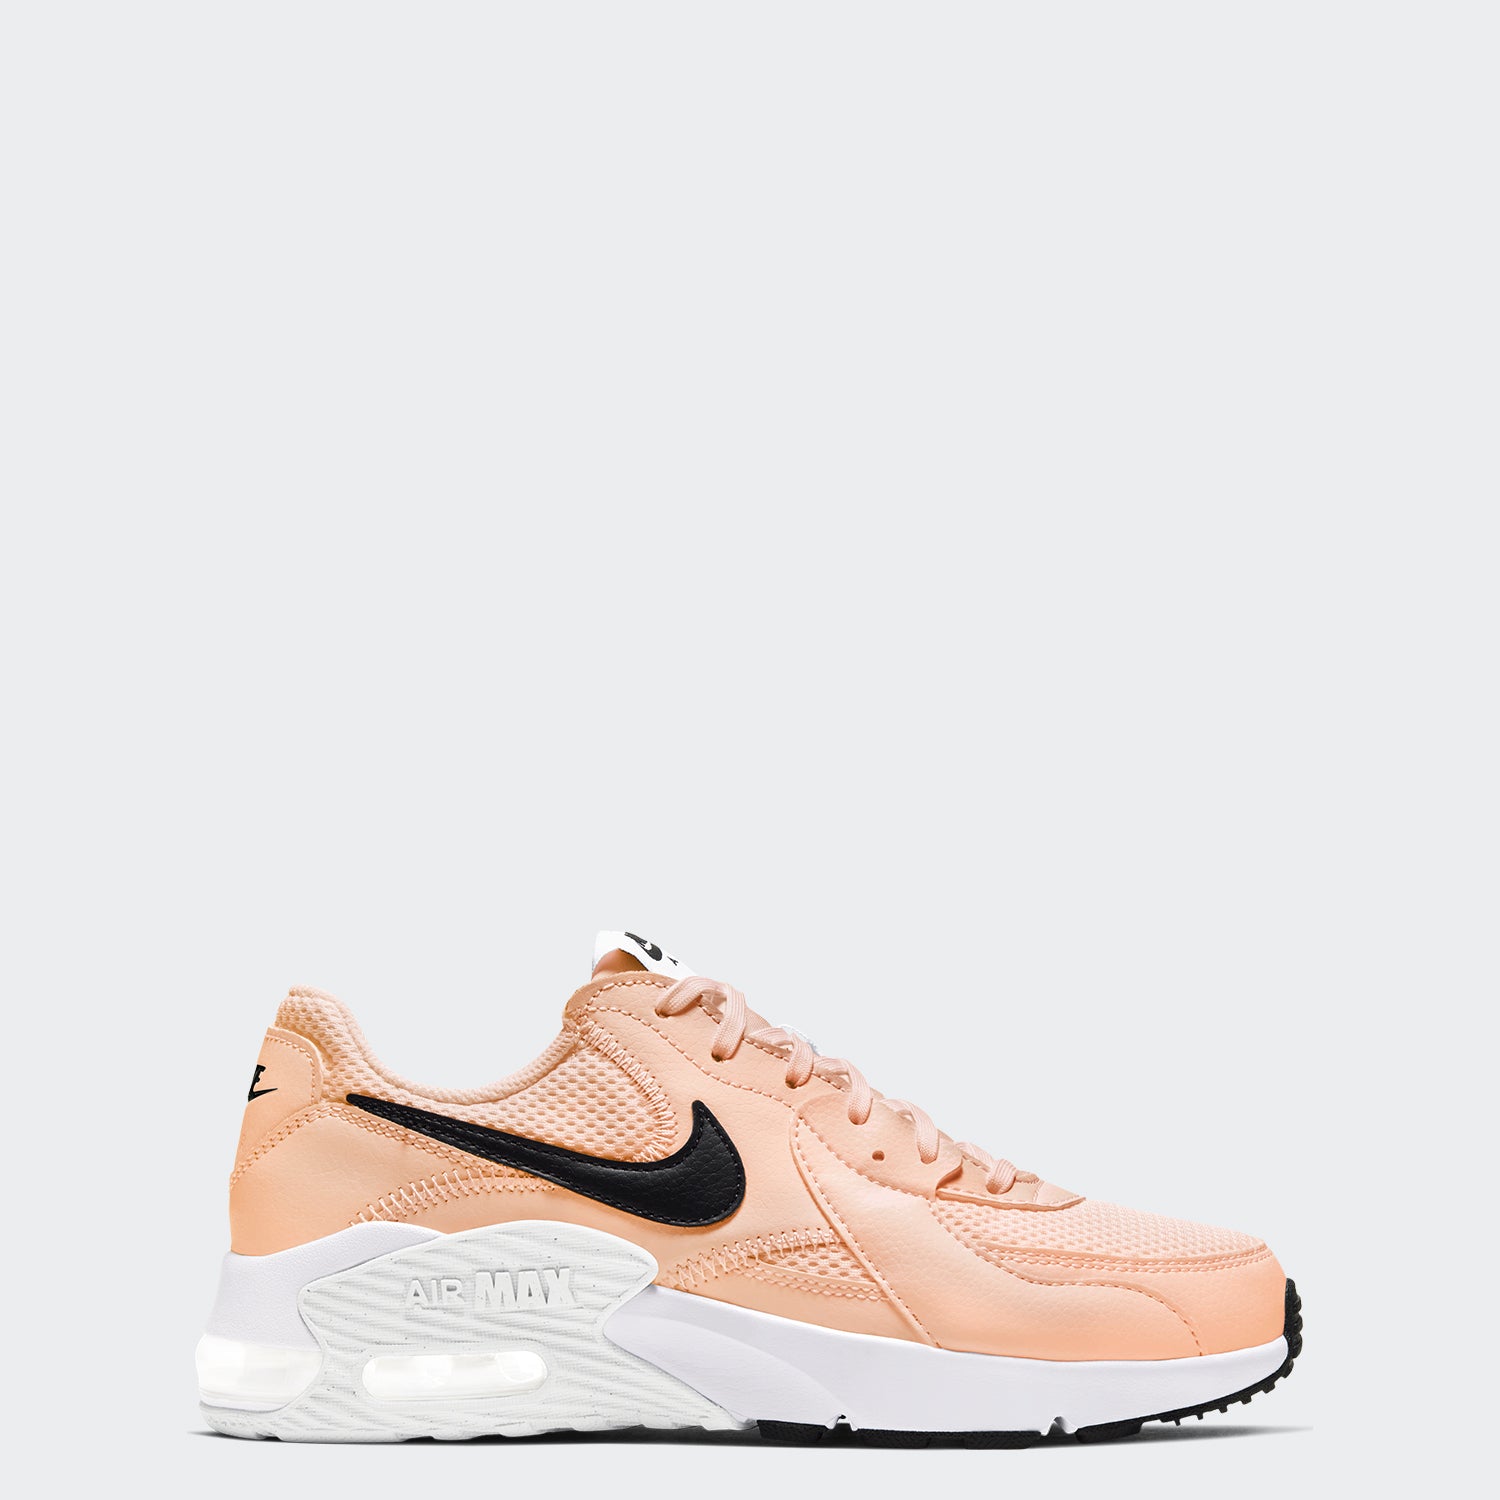 coral colored nikes